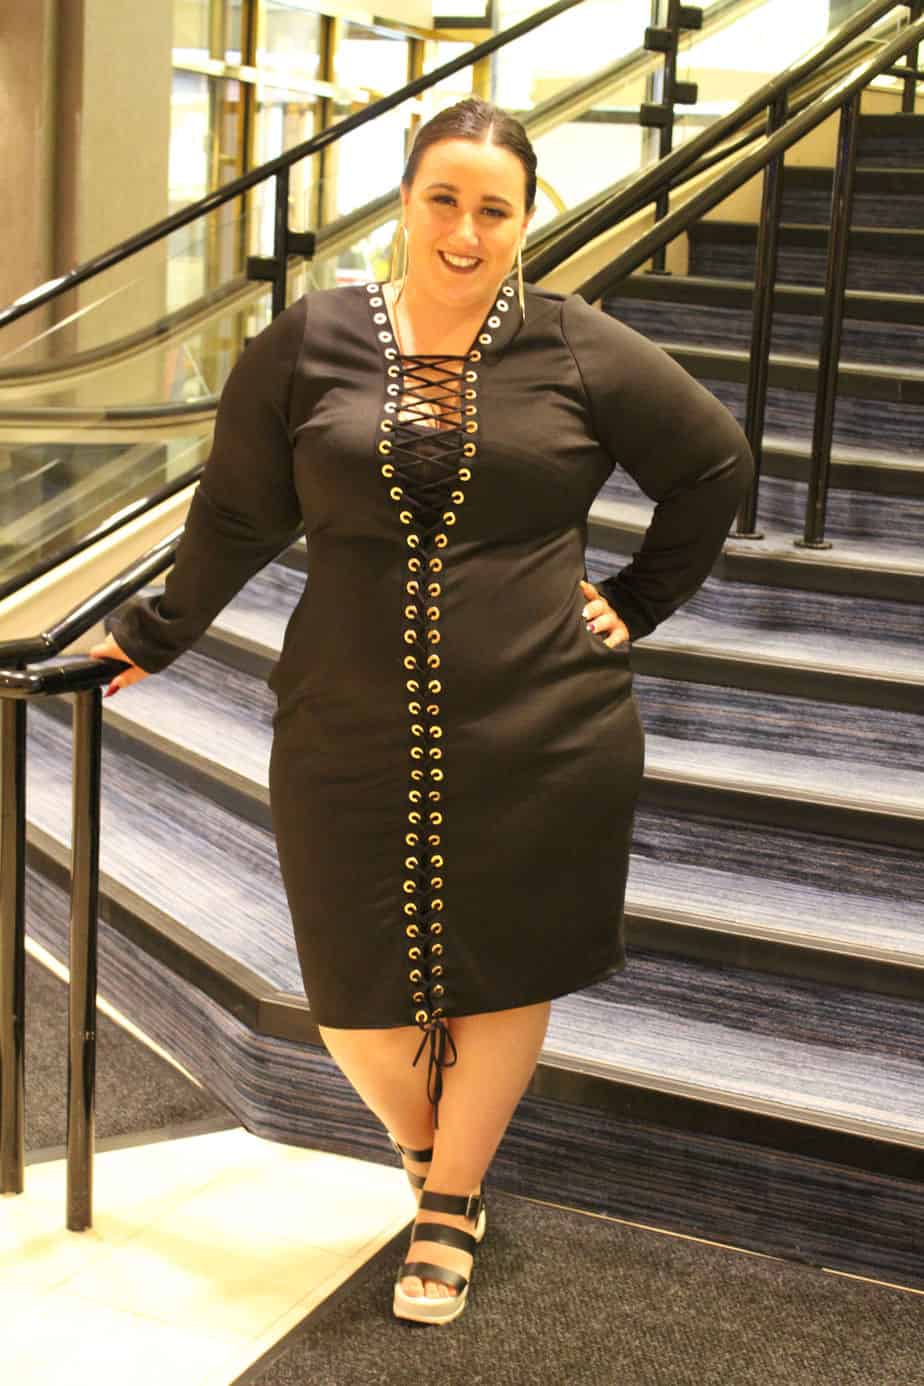 The Curvy Women Who Rock Brunch + Fave Looks from Curves Rock Weekend